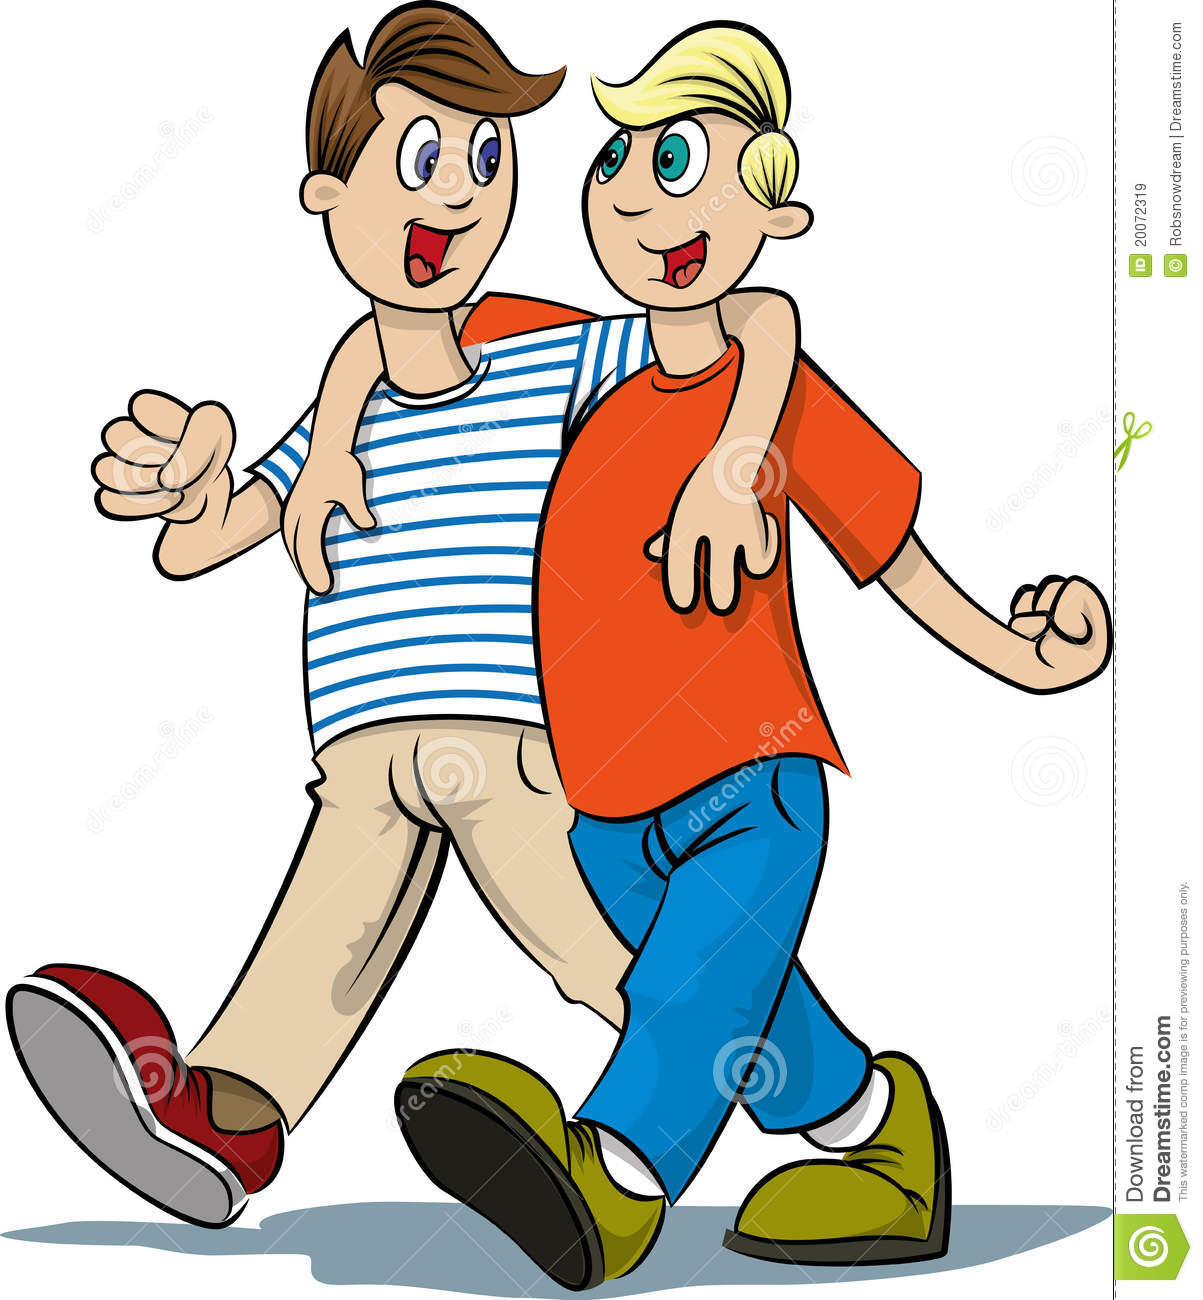 Two Boys Walking Royalty Free Stock Images   Image  20072319